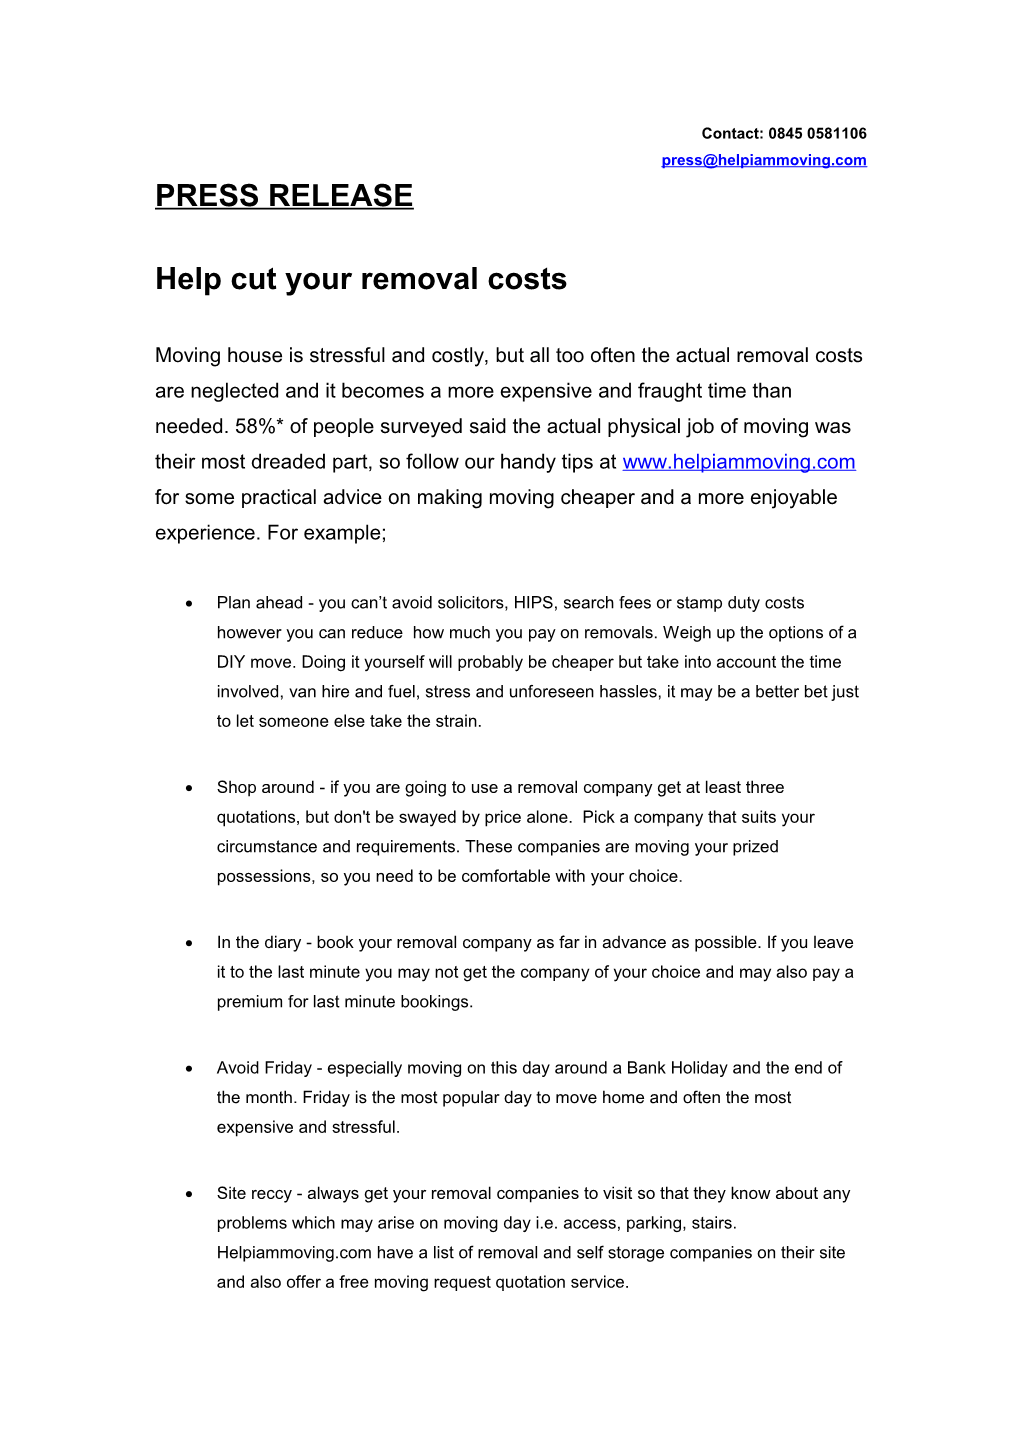 Help Cut Your Removal Costs